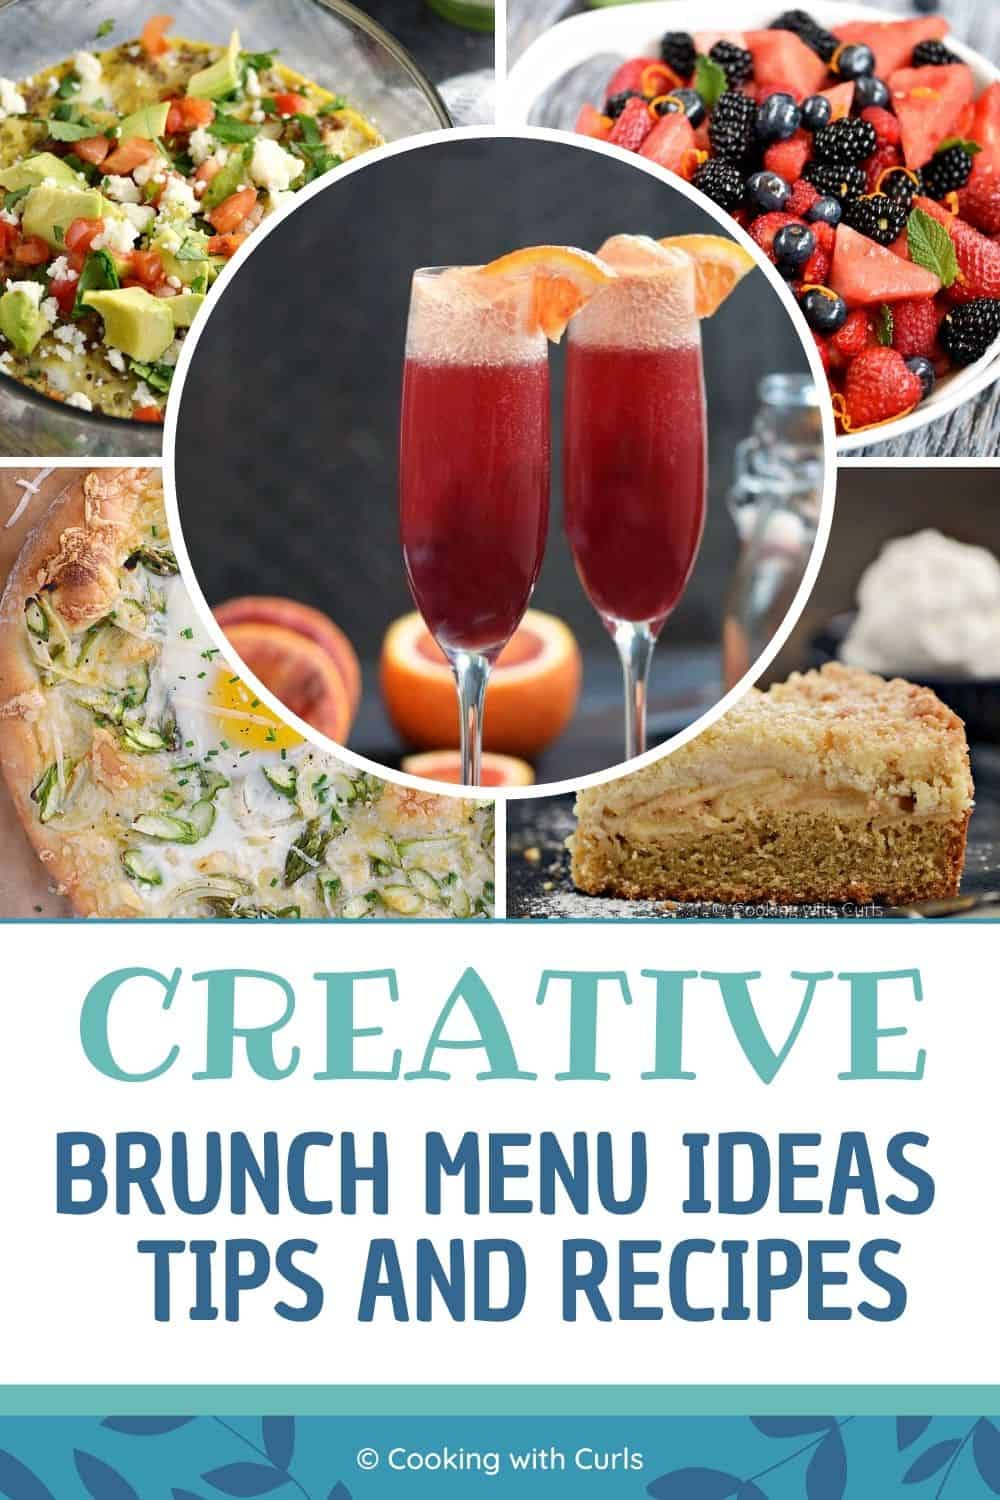 Creative Brunch Menu Ideas graphic with images of egg casserole, fruit salad, egg and asparagus pizza, apple cake and blood orange mimosas in champagne flutes.